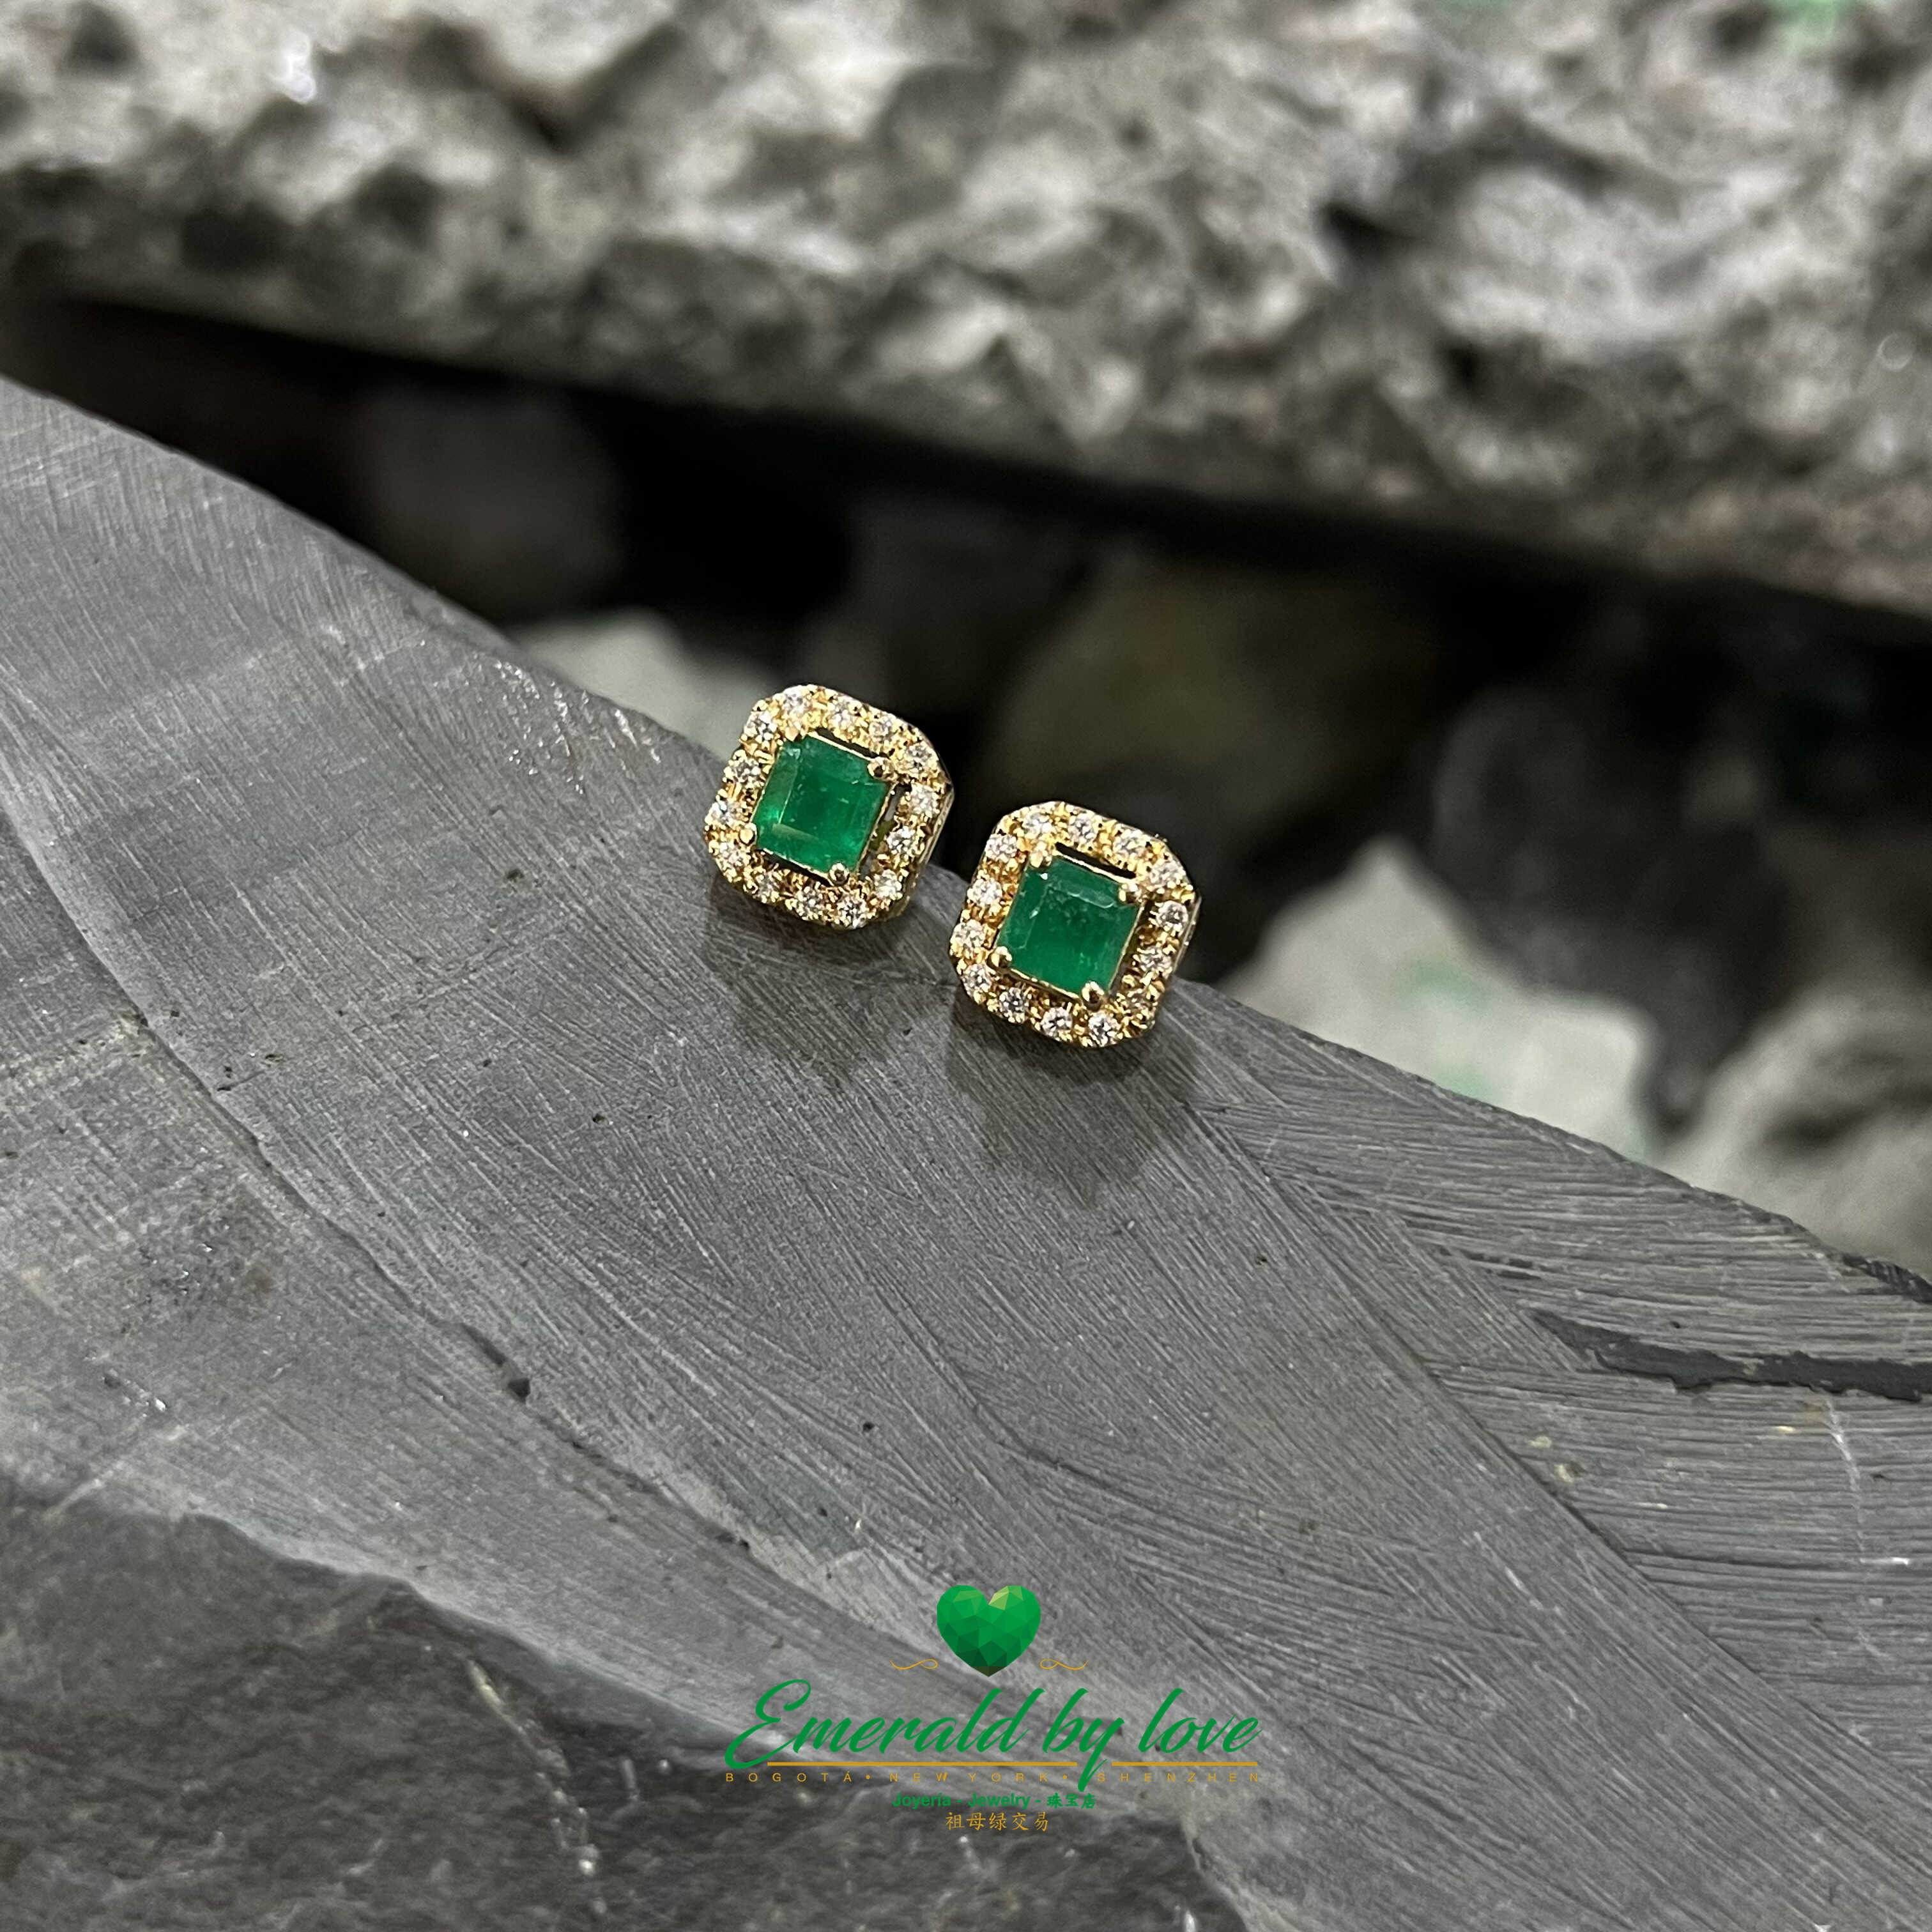 Timeless Beauty: Marquise-Cut Yellow Gold Earrings with Emeralds 1.9 TCW